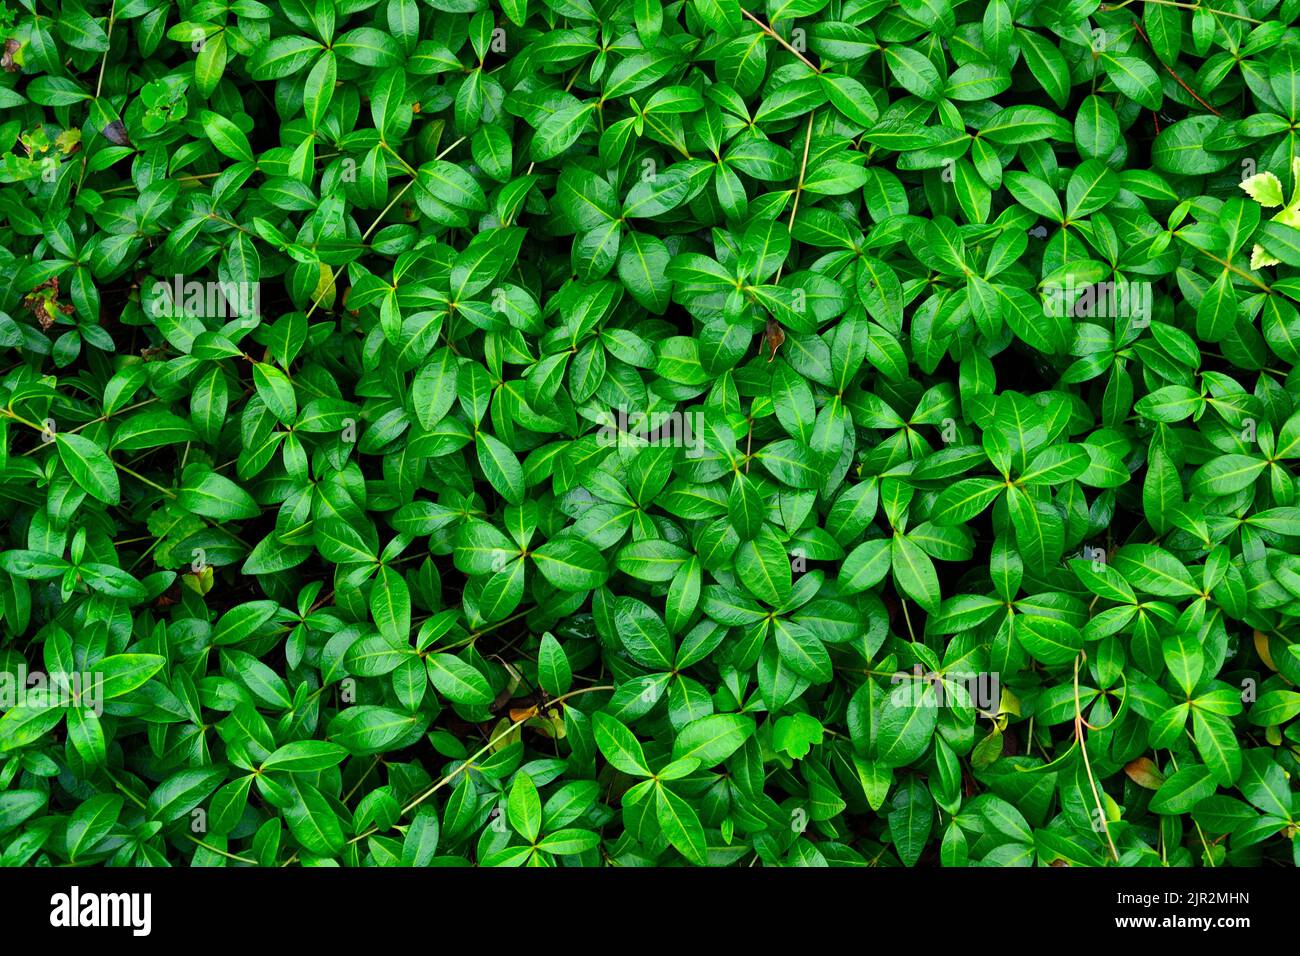 Vinca minor green leaves - natural green summer background pattern. Lush glossy foliage of periwinkle - flat lay, top view. Botanical, gardening or ec Stock Photo